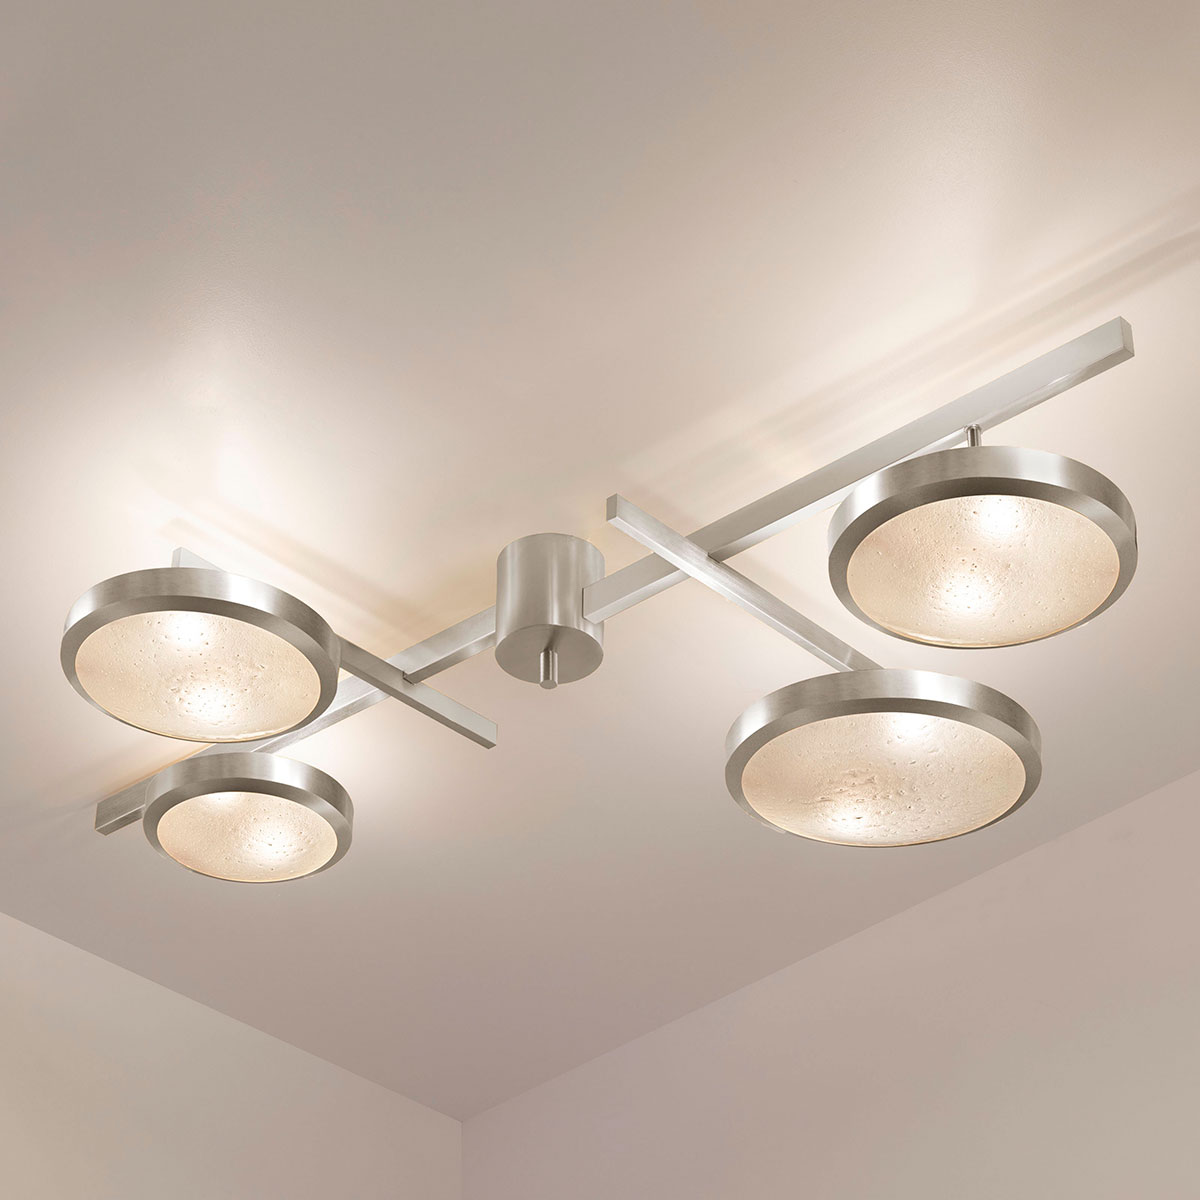 Tetrix ceiling light with satin nickel finish by Gaspare Asaro